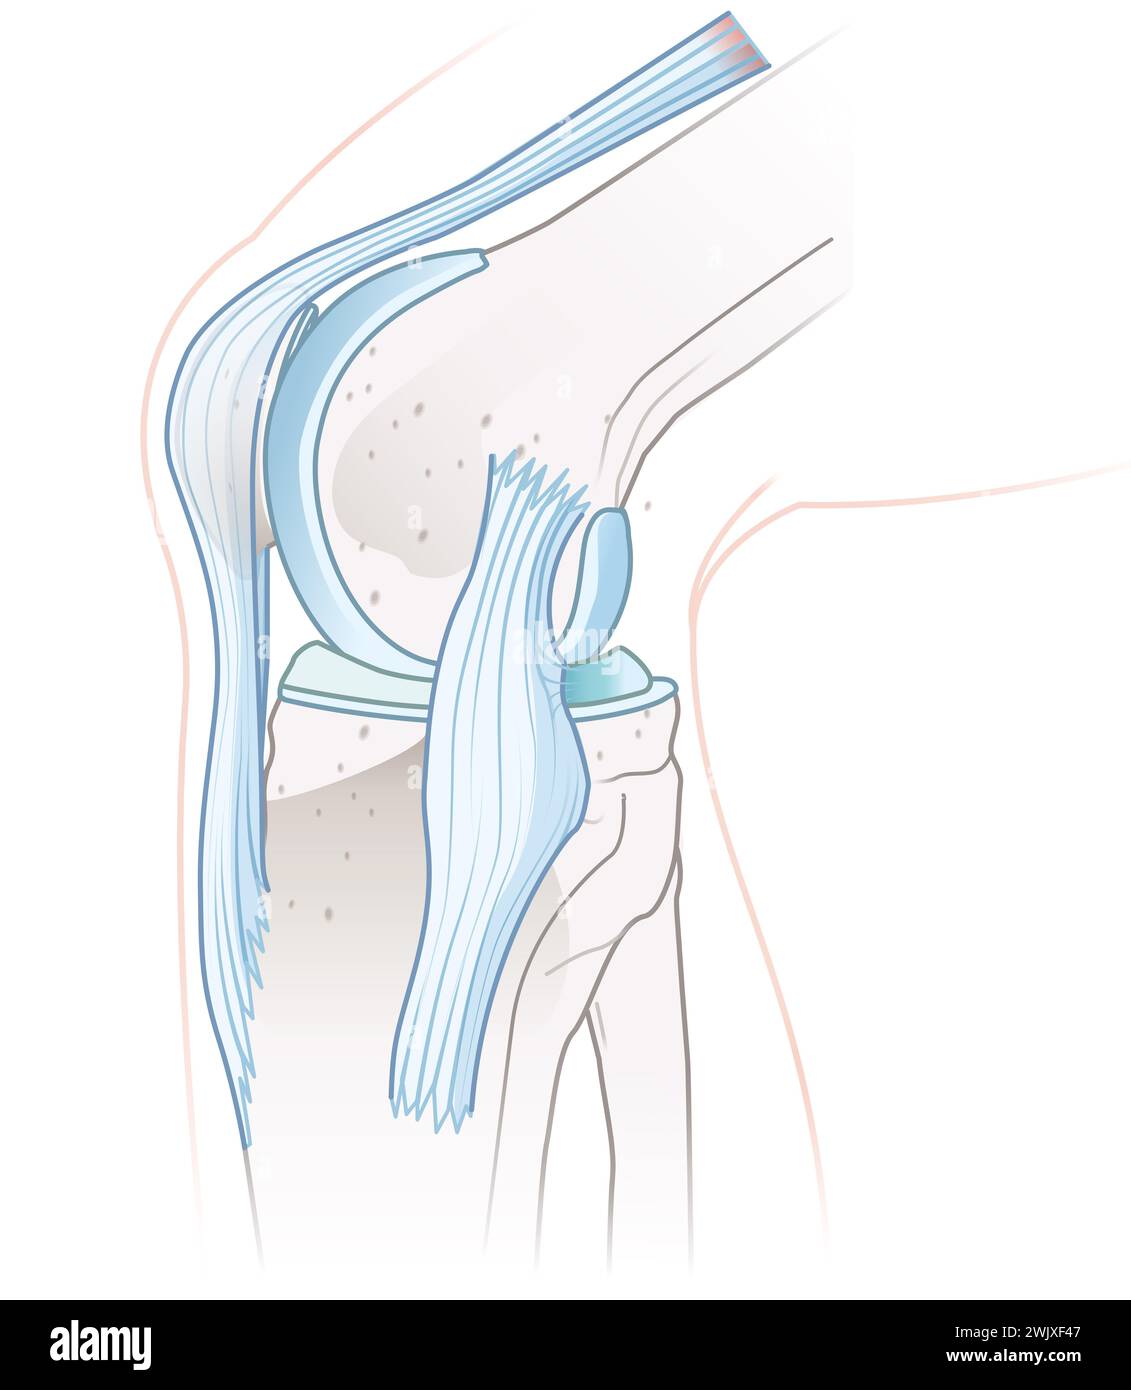 Illustration showing healthy knee joint anatomy. Medial view. Illustration Stock Photo